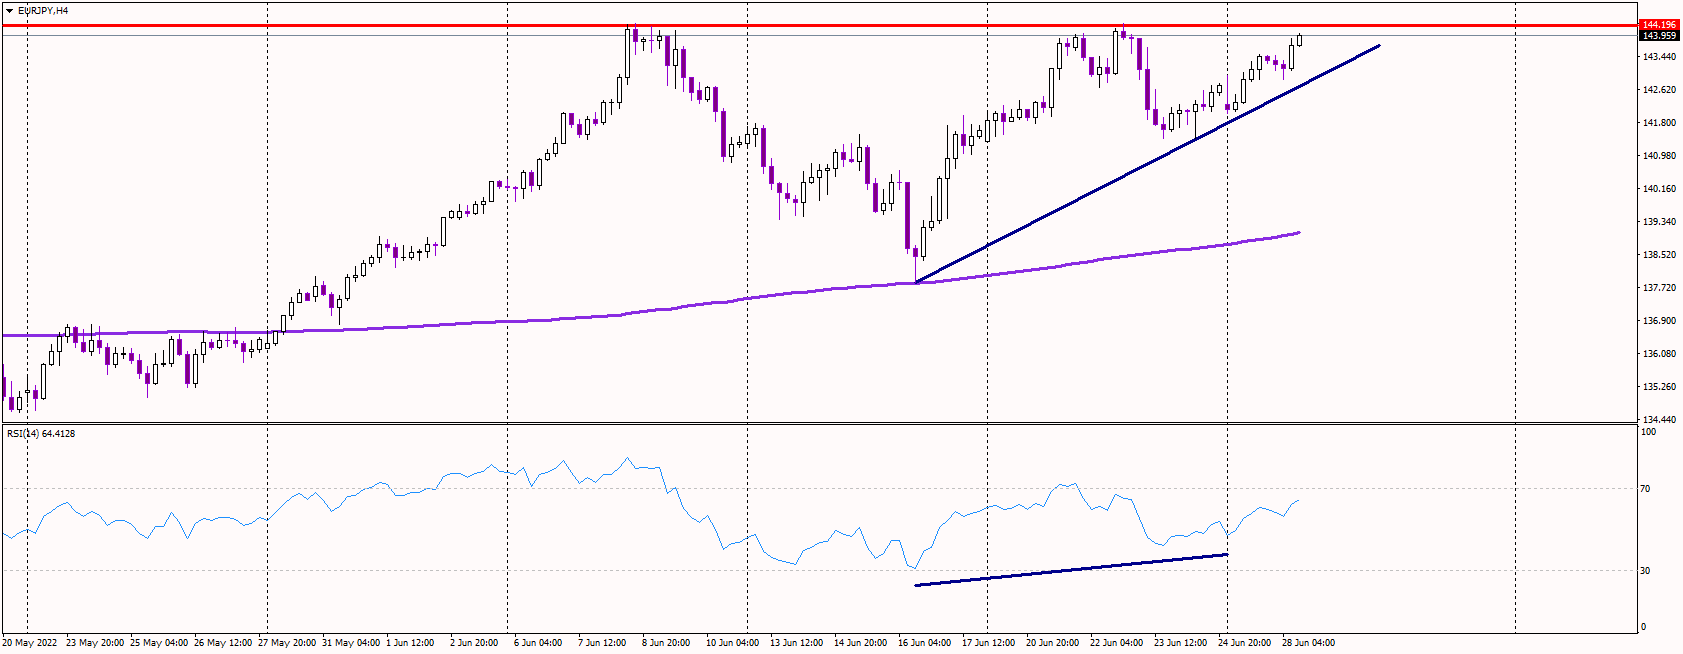 EURJPY Pushes to Cycle Highs Again